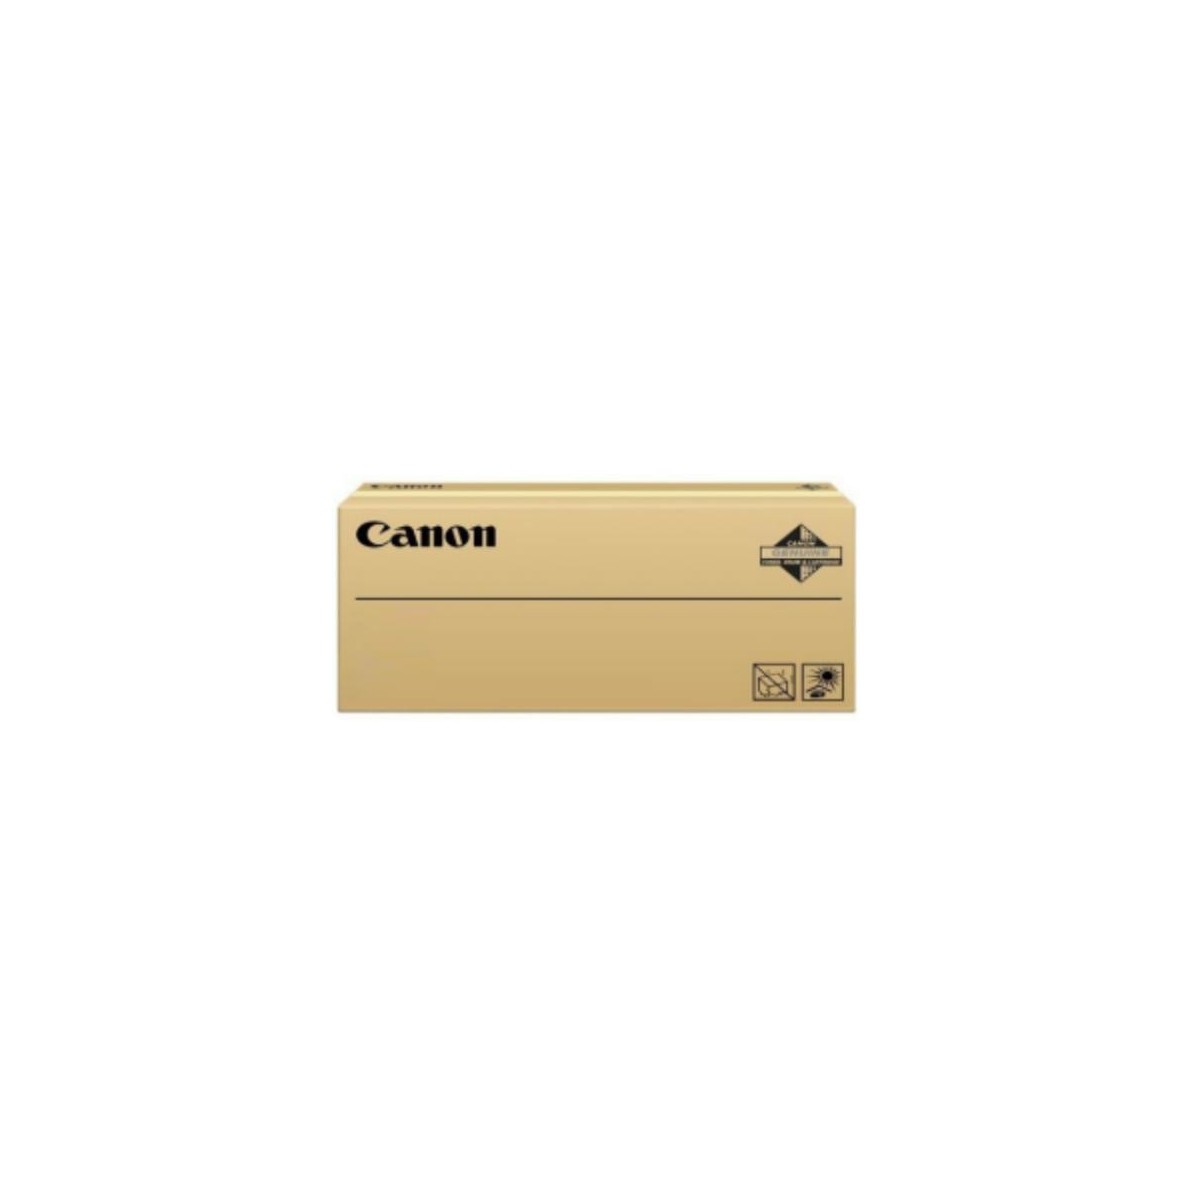 Canon 29951030 - 19000 pages - Magenta - 1 pc(s)